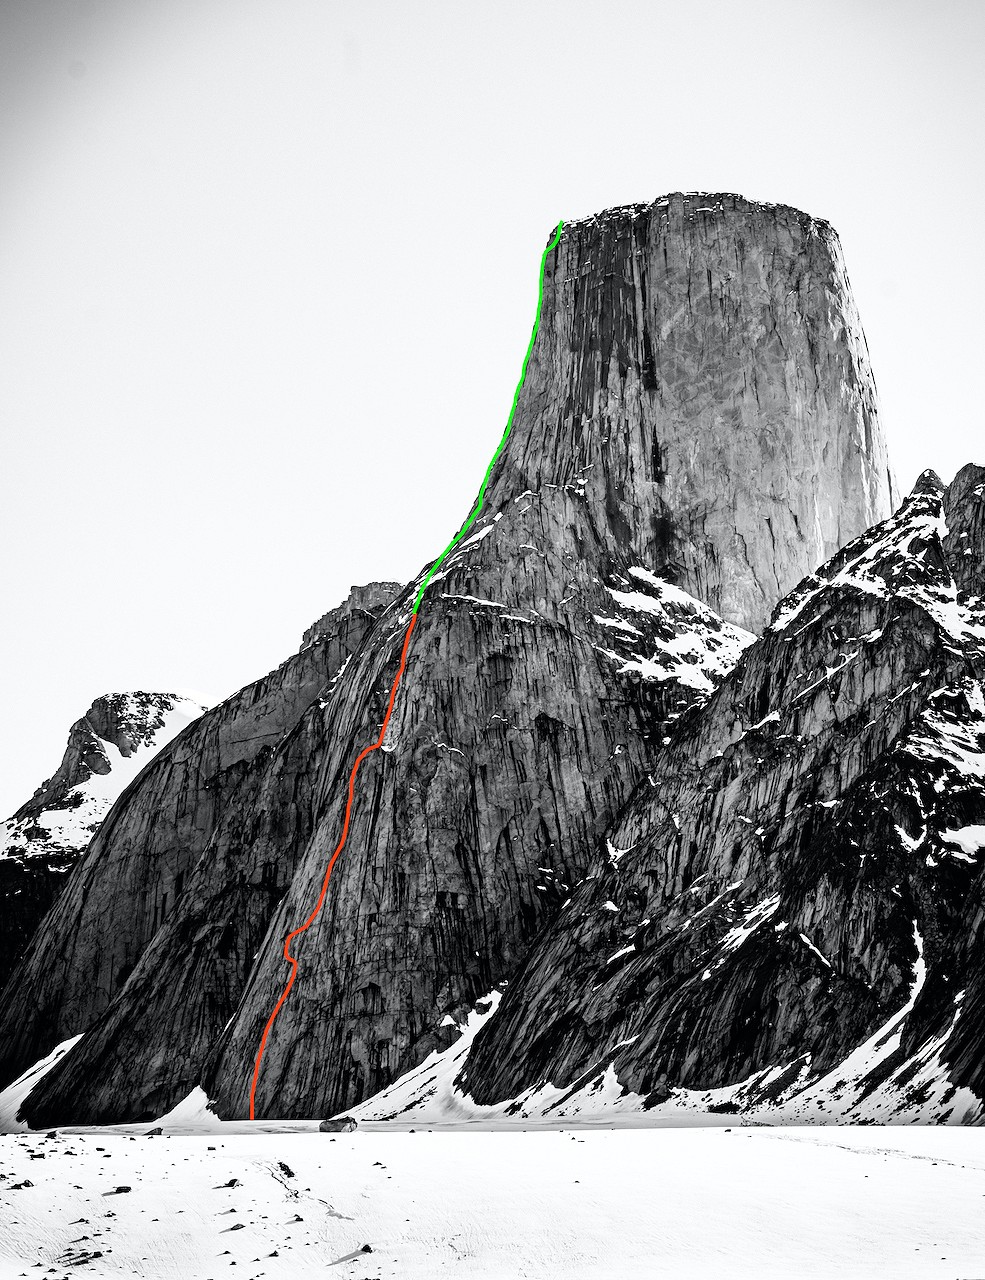 Loki's Mischief and the Scott Route in full.  © Leo Houlding